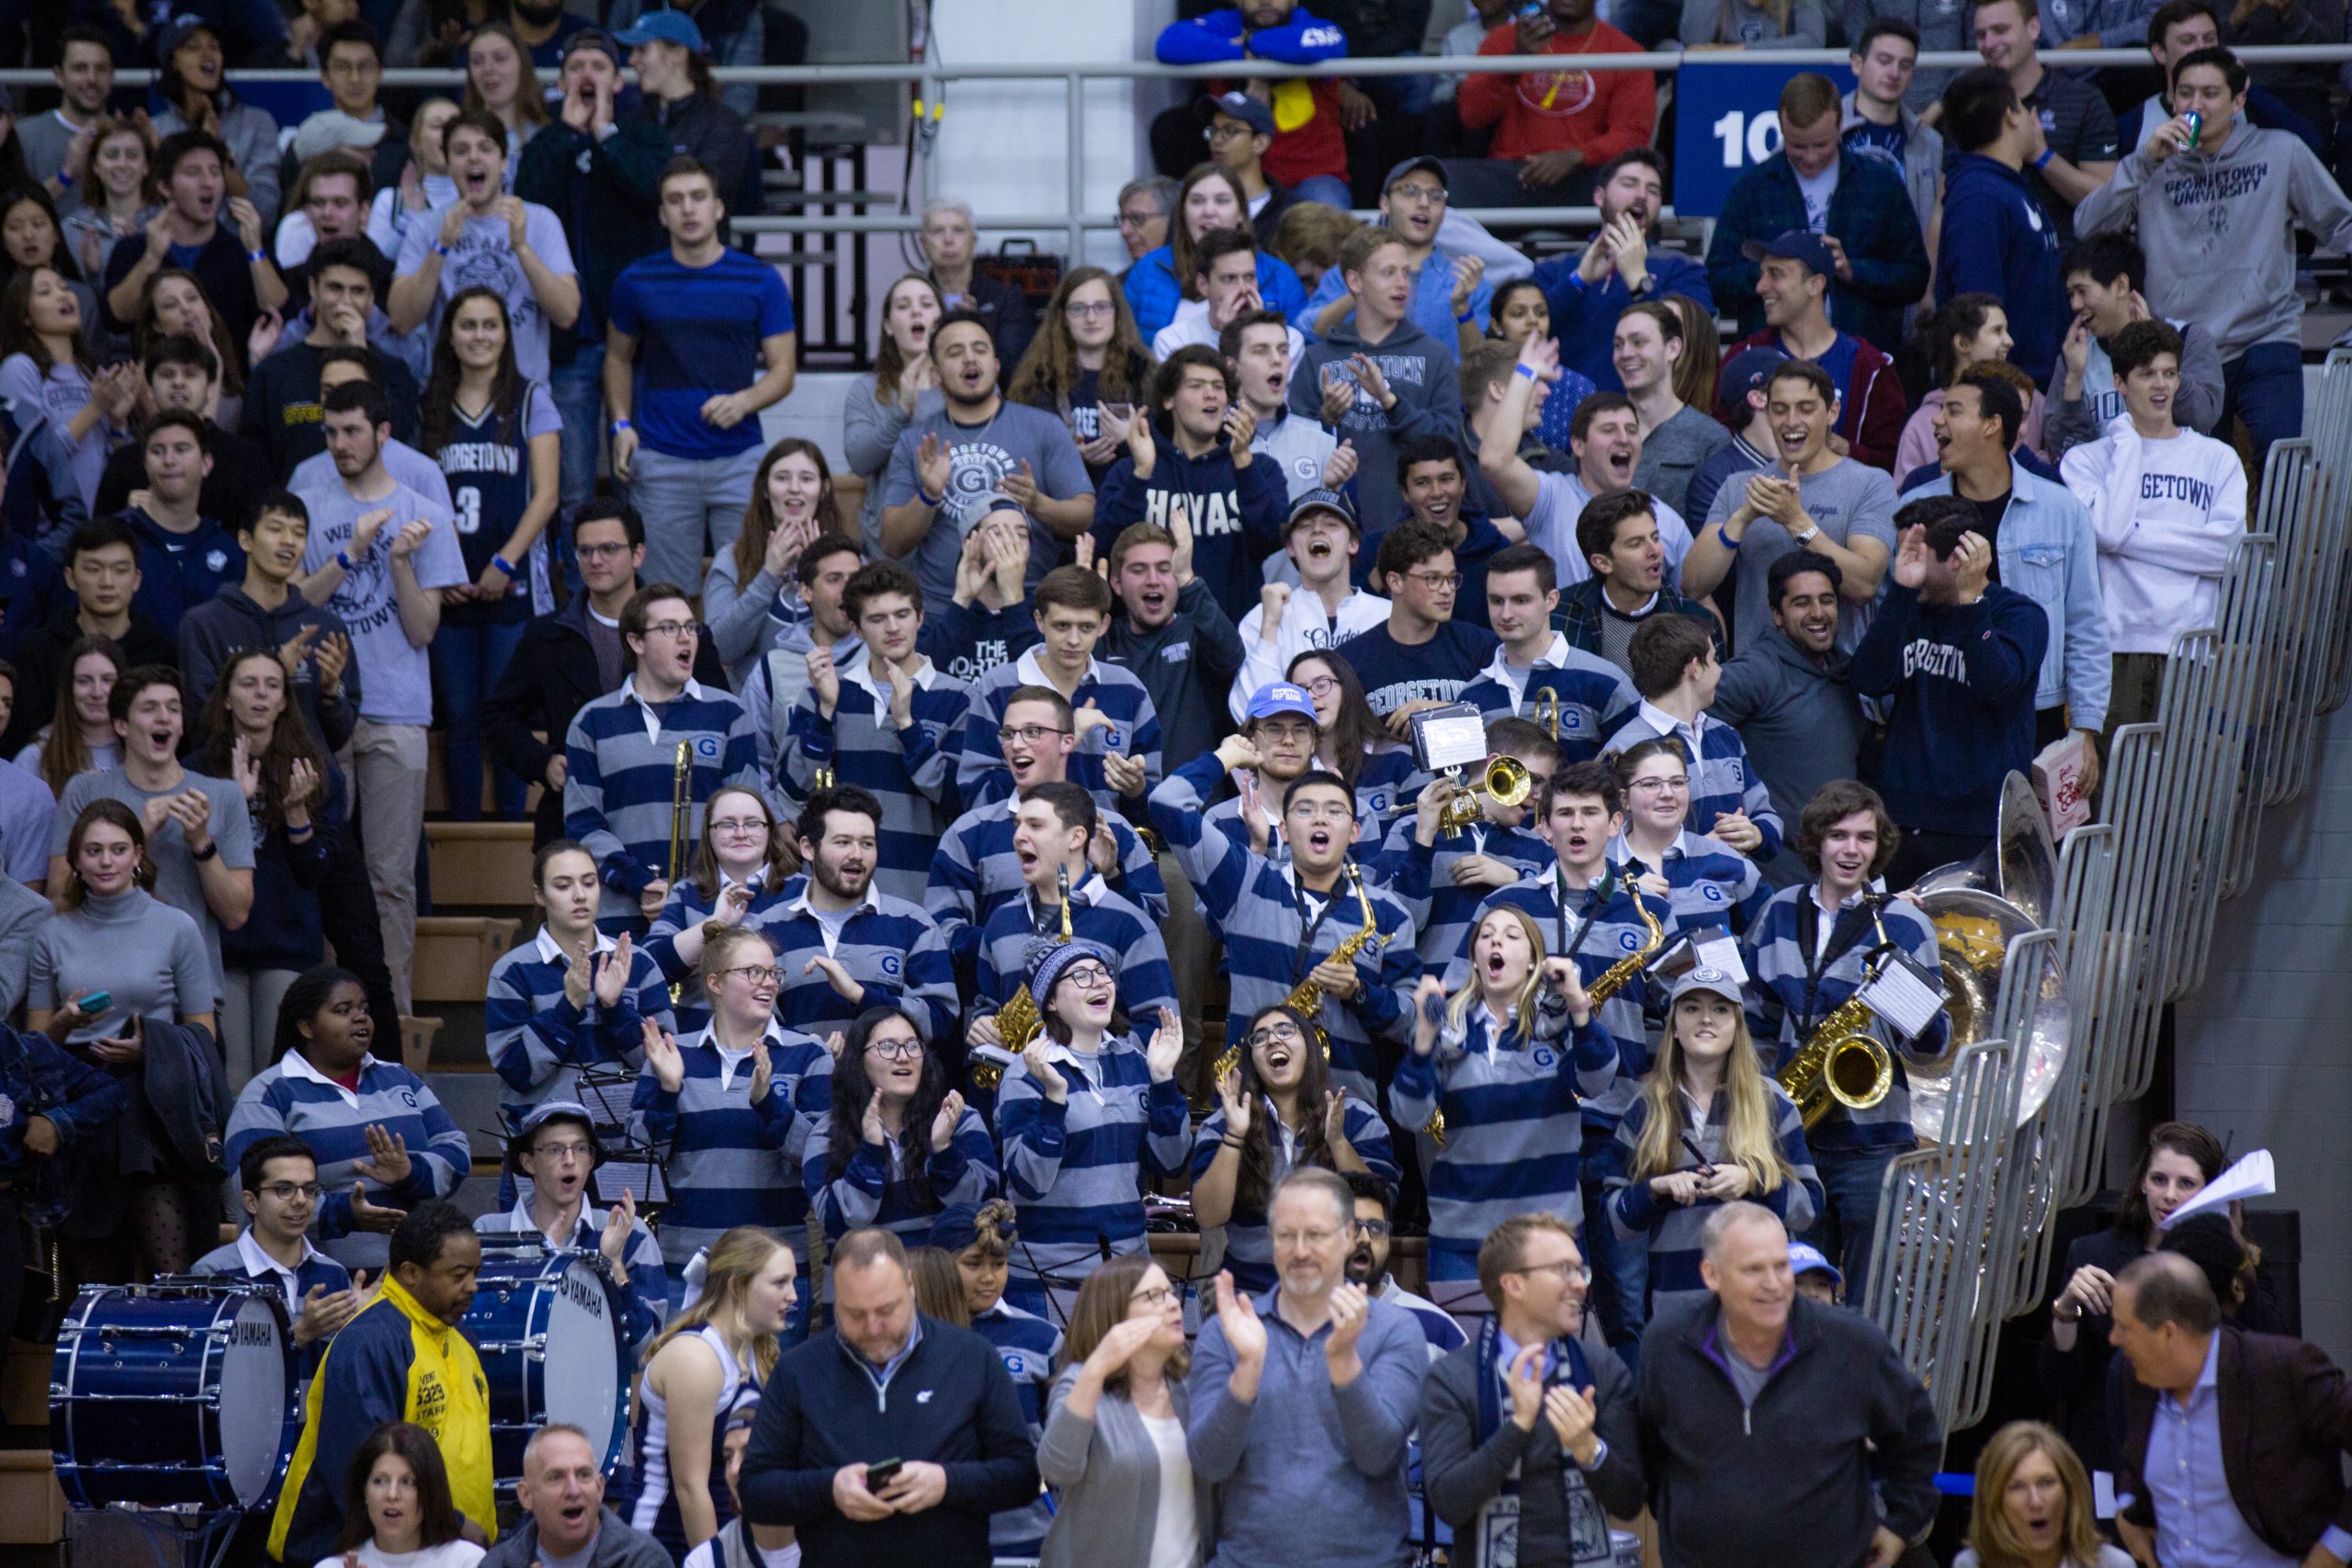 Members of the Georgetown Pep Band stand in the bleachers at a men's basketball game cheering on the team.